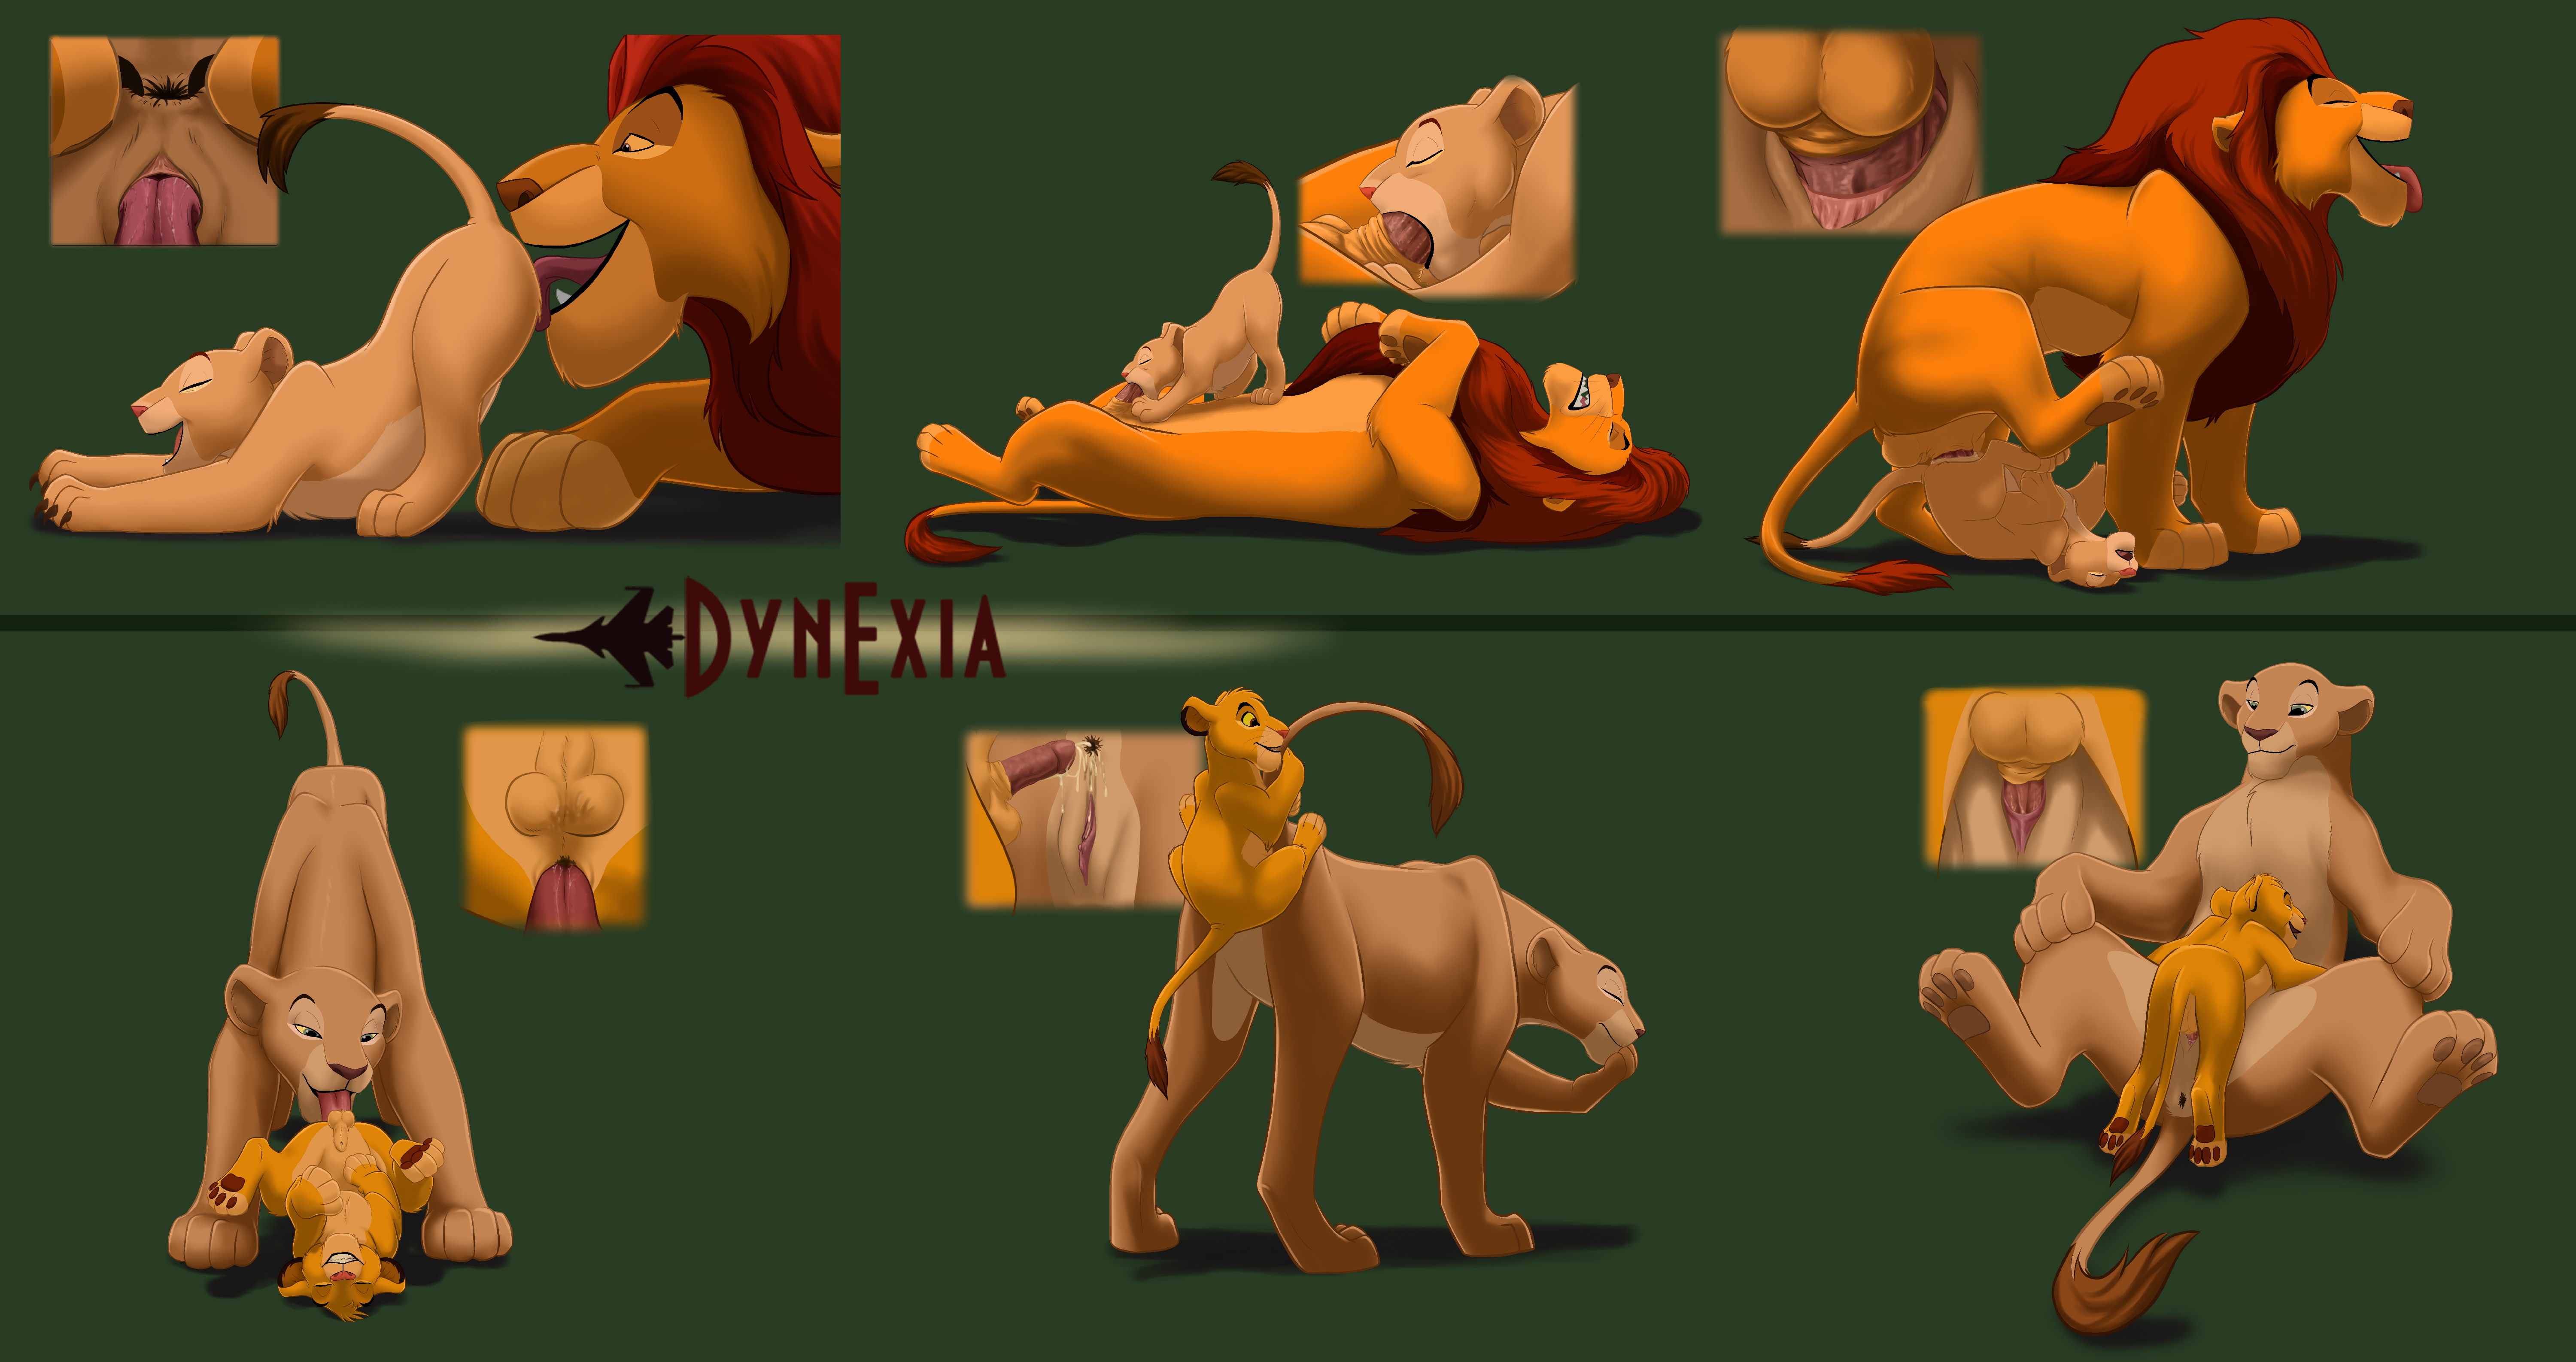 Anatomically Correct Lion Porn - Rule34 - If it exists, there is porn of it / dynexia, mufasa, nala, sarabi,  simba / 1306651